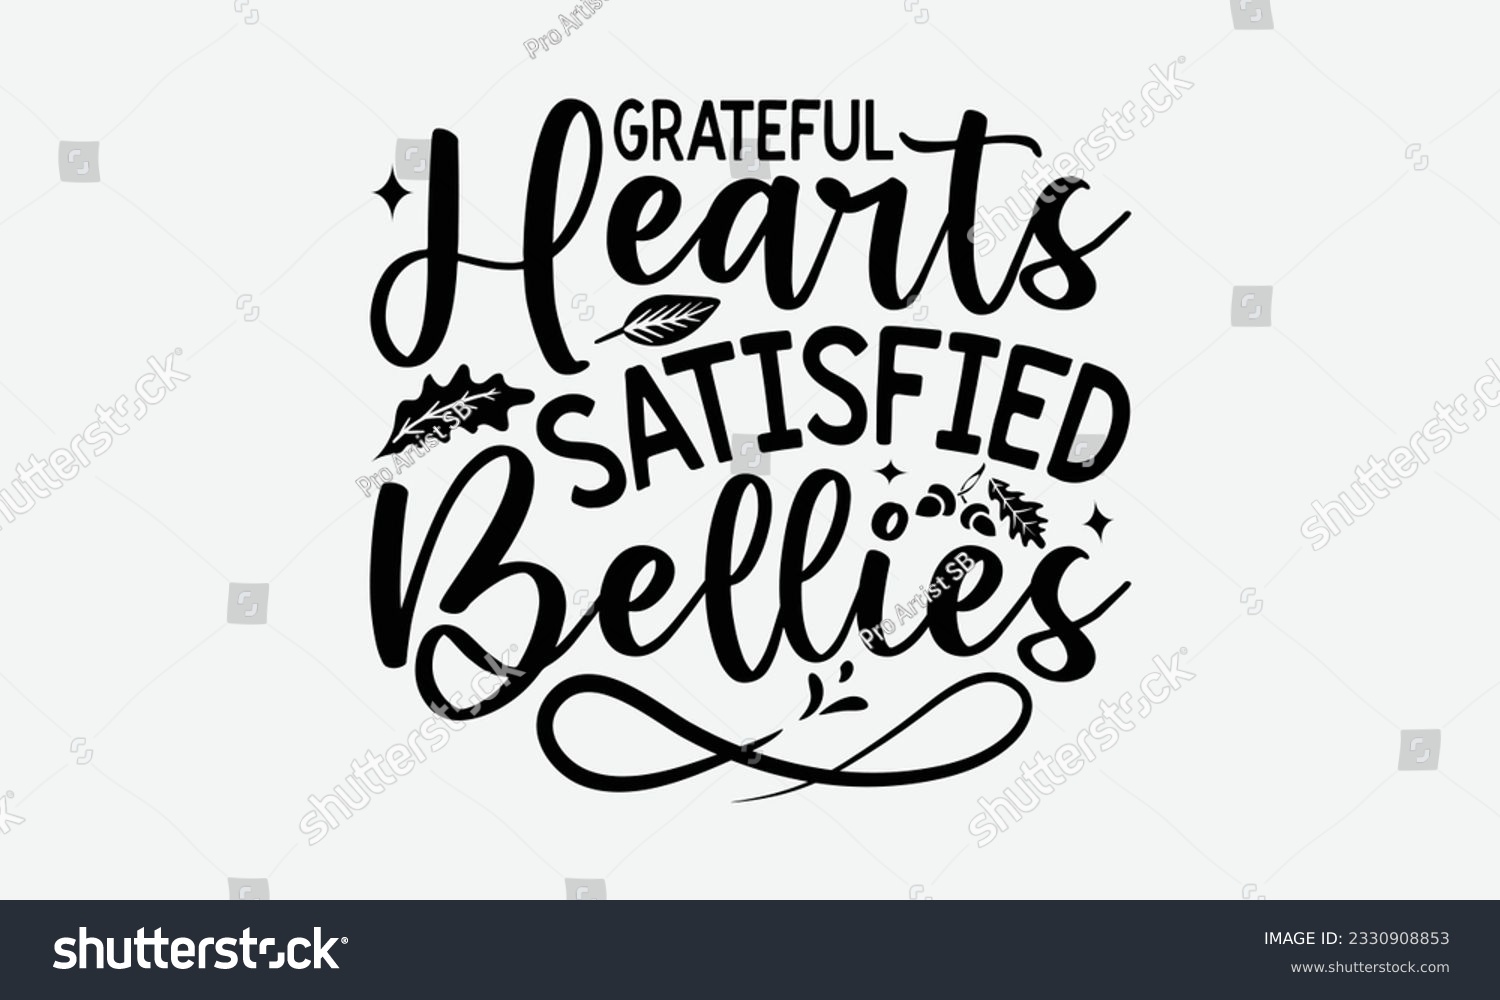 SVG of Grateful Hearts Satisfied Bellies - Thanksgiving T-shirt Design Template, Happy Turkey Day SVG Quotes, Hand Drawn Lettering Phrase Isolated On White Background. svg